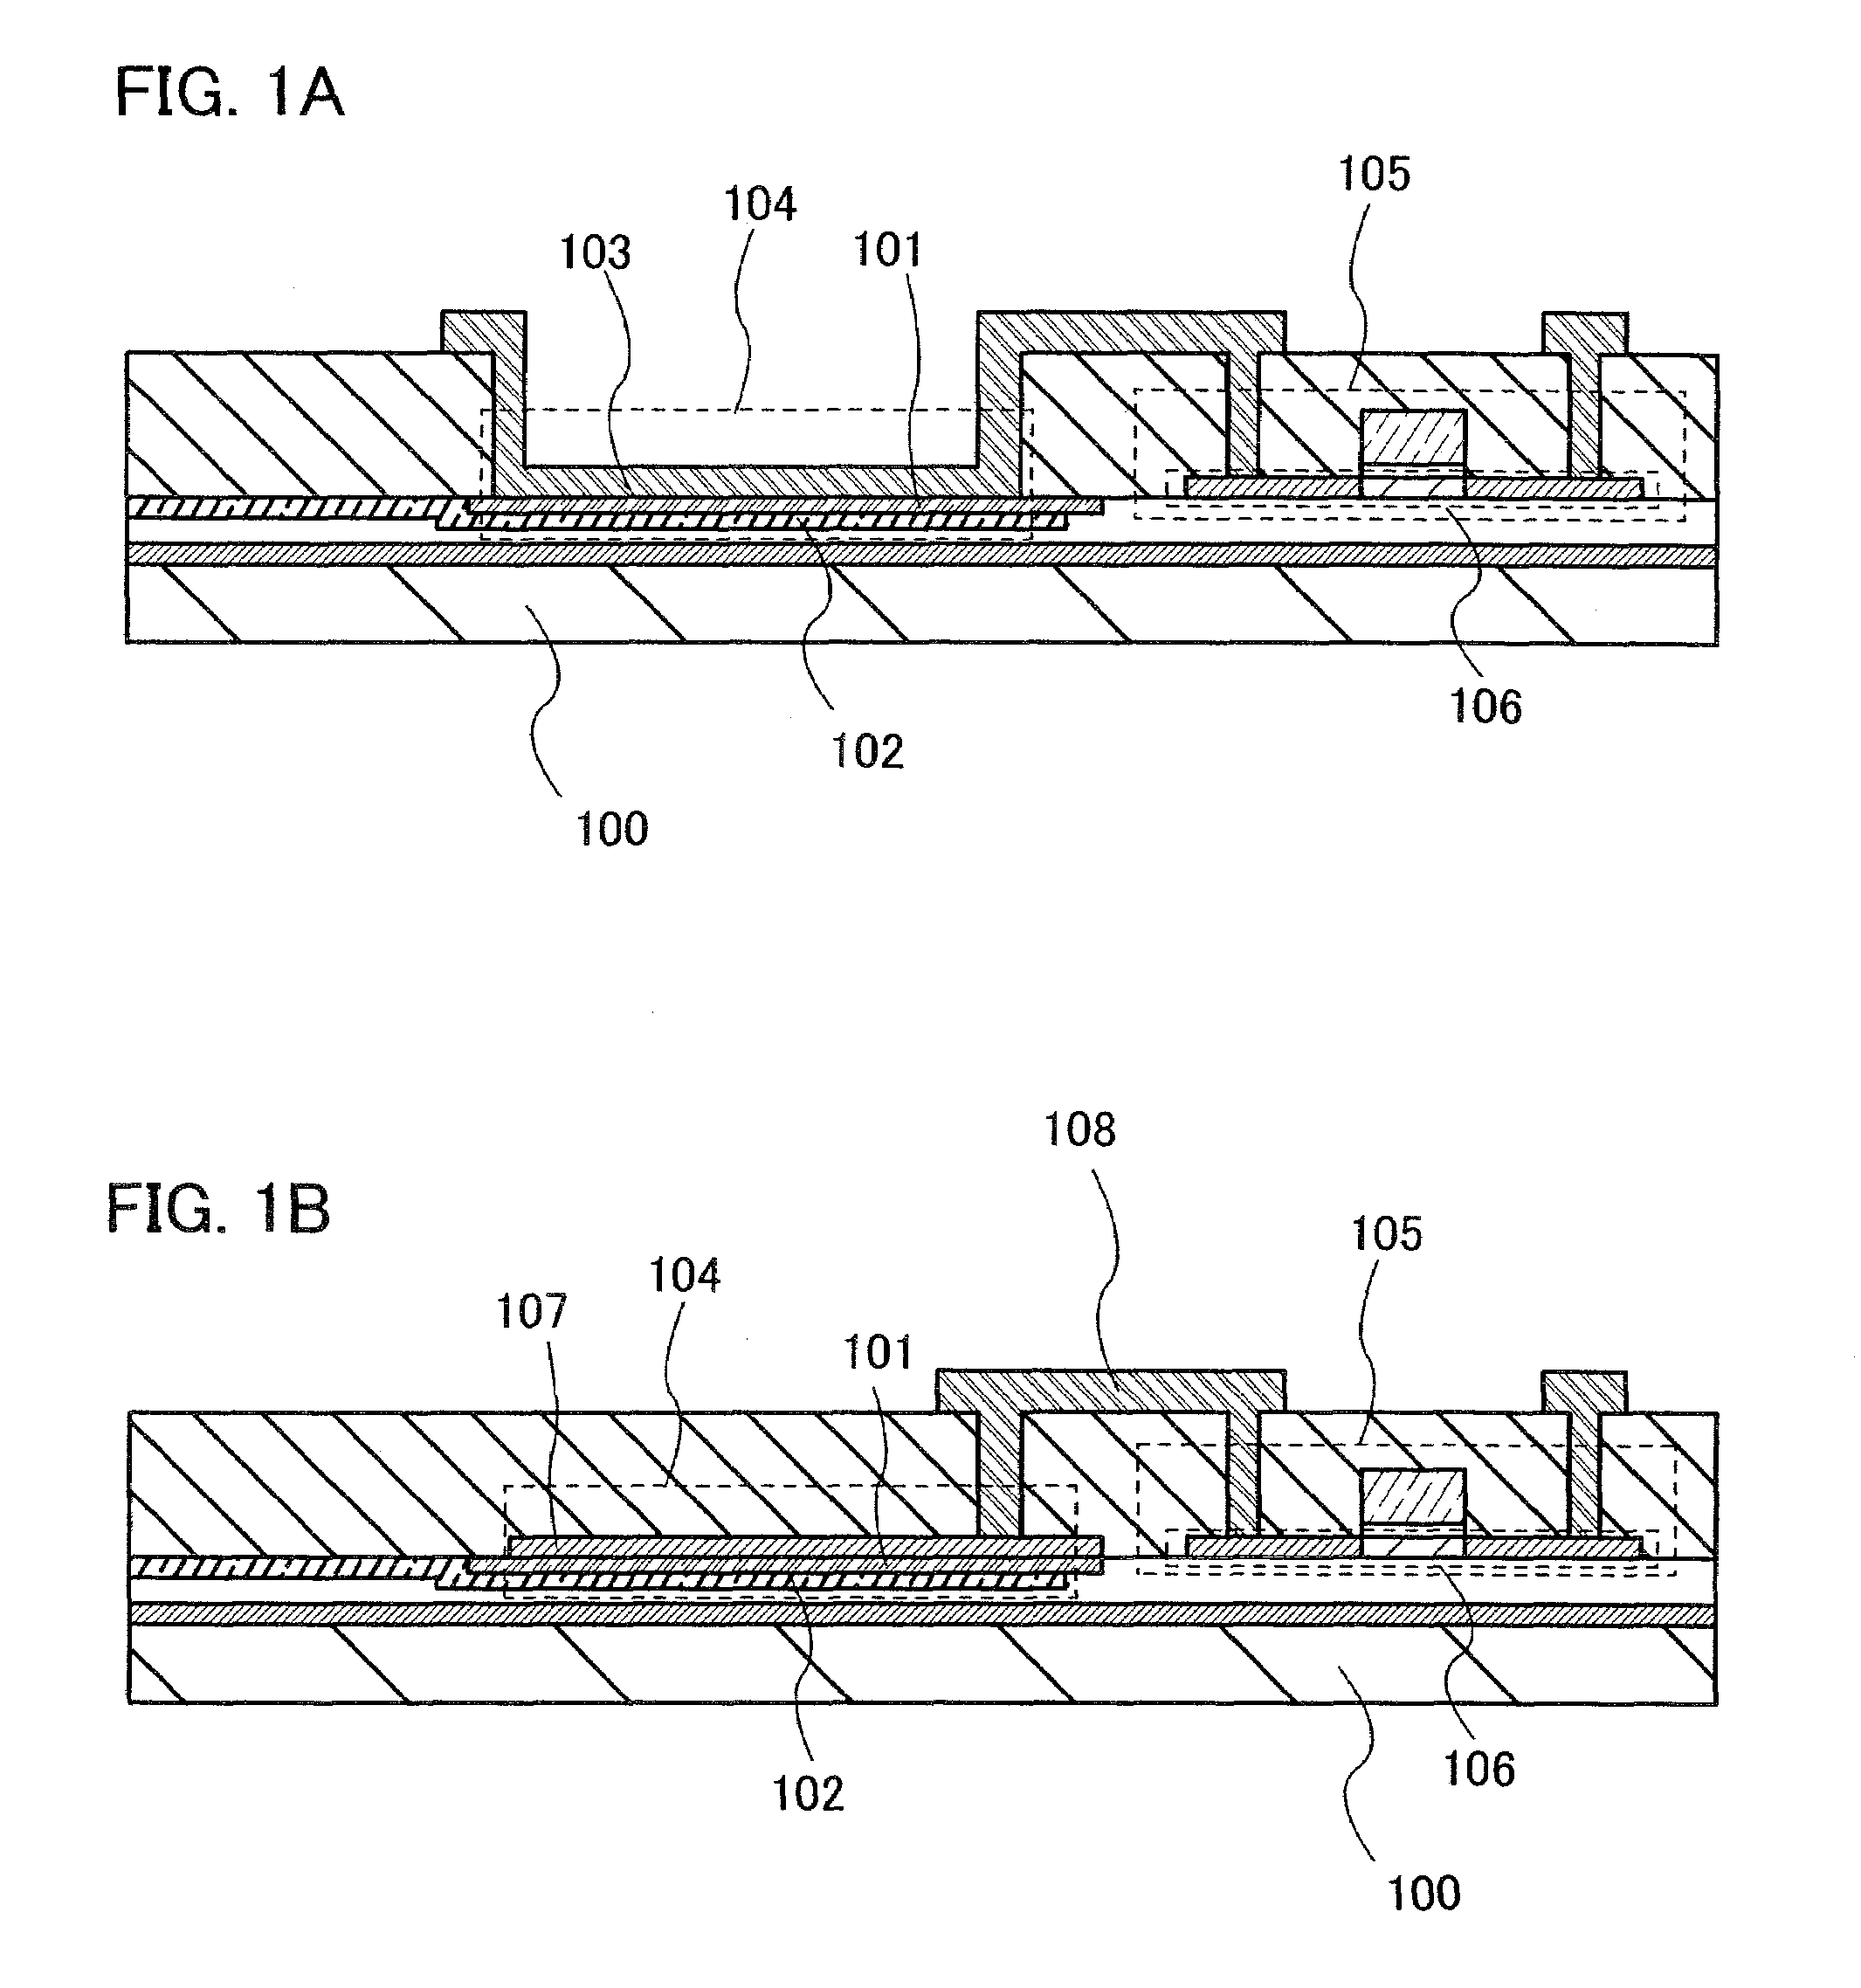 Semiconductor device including storage capacitor with yttrium oxide capacitor dielectric